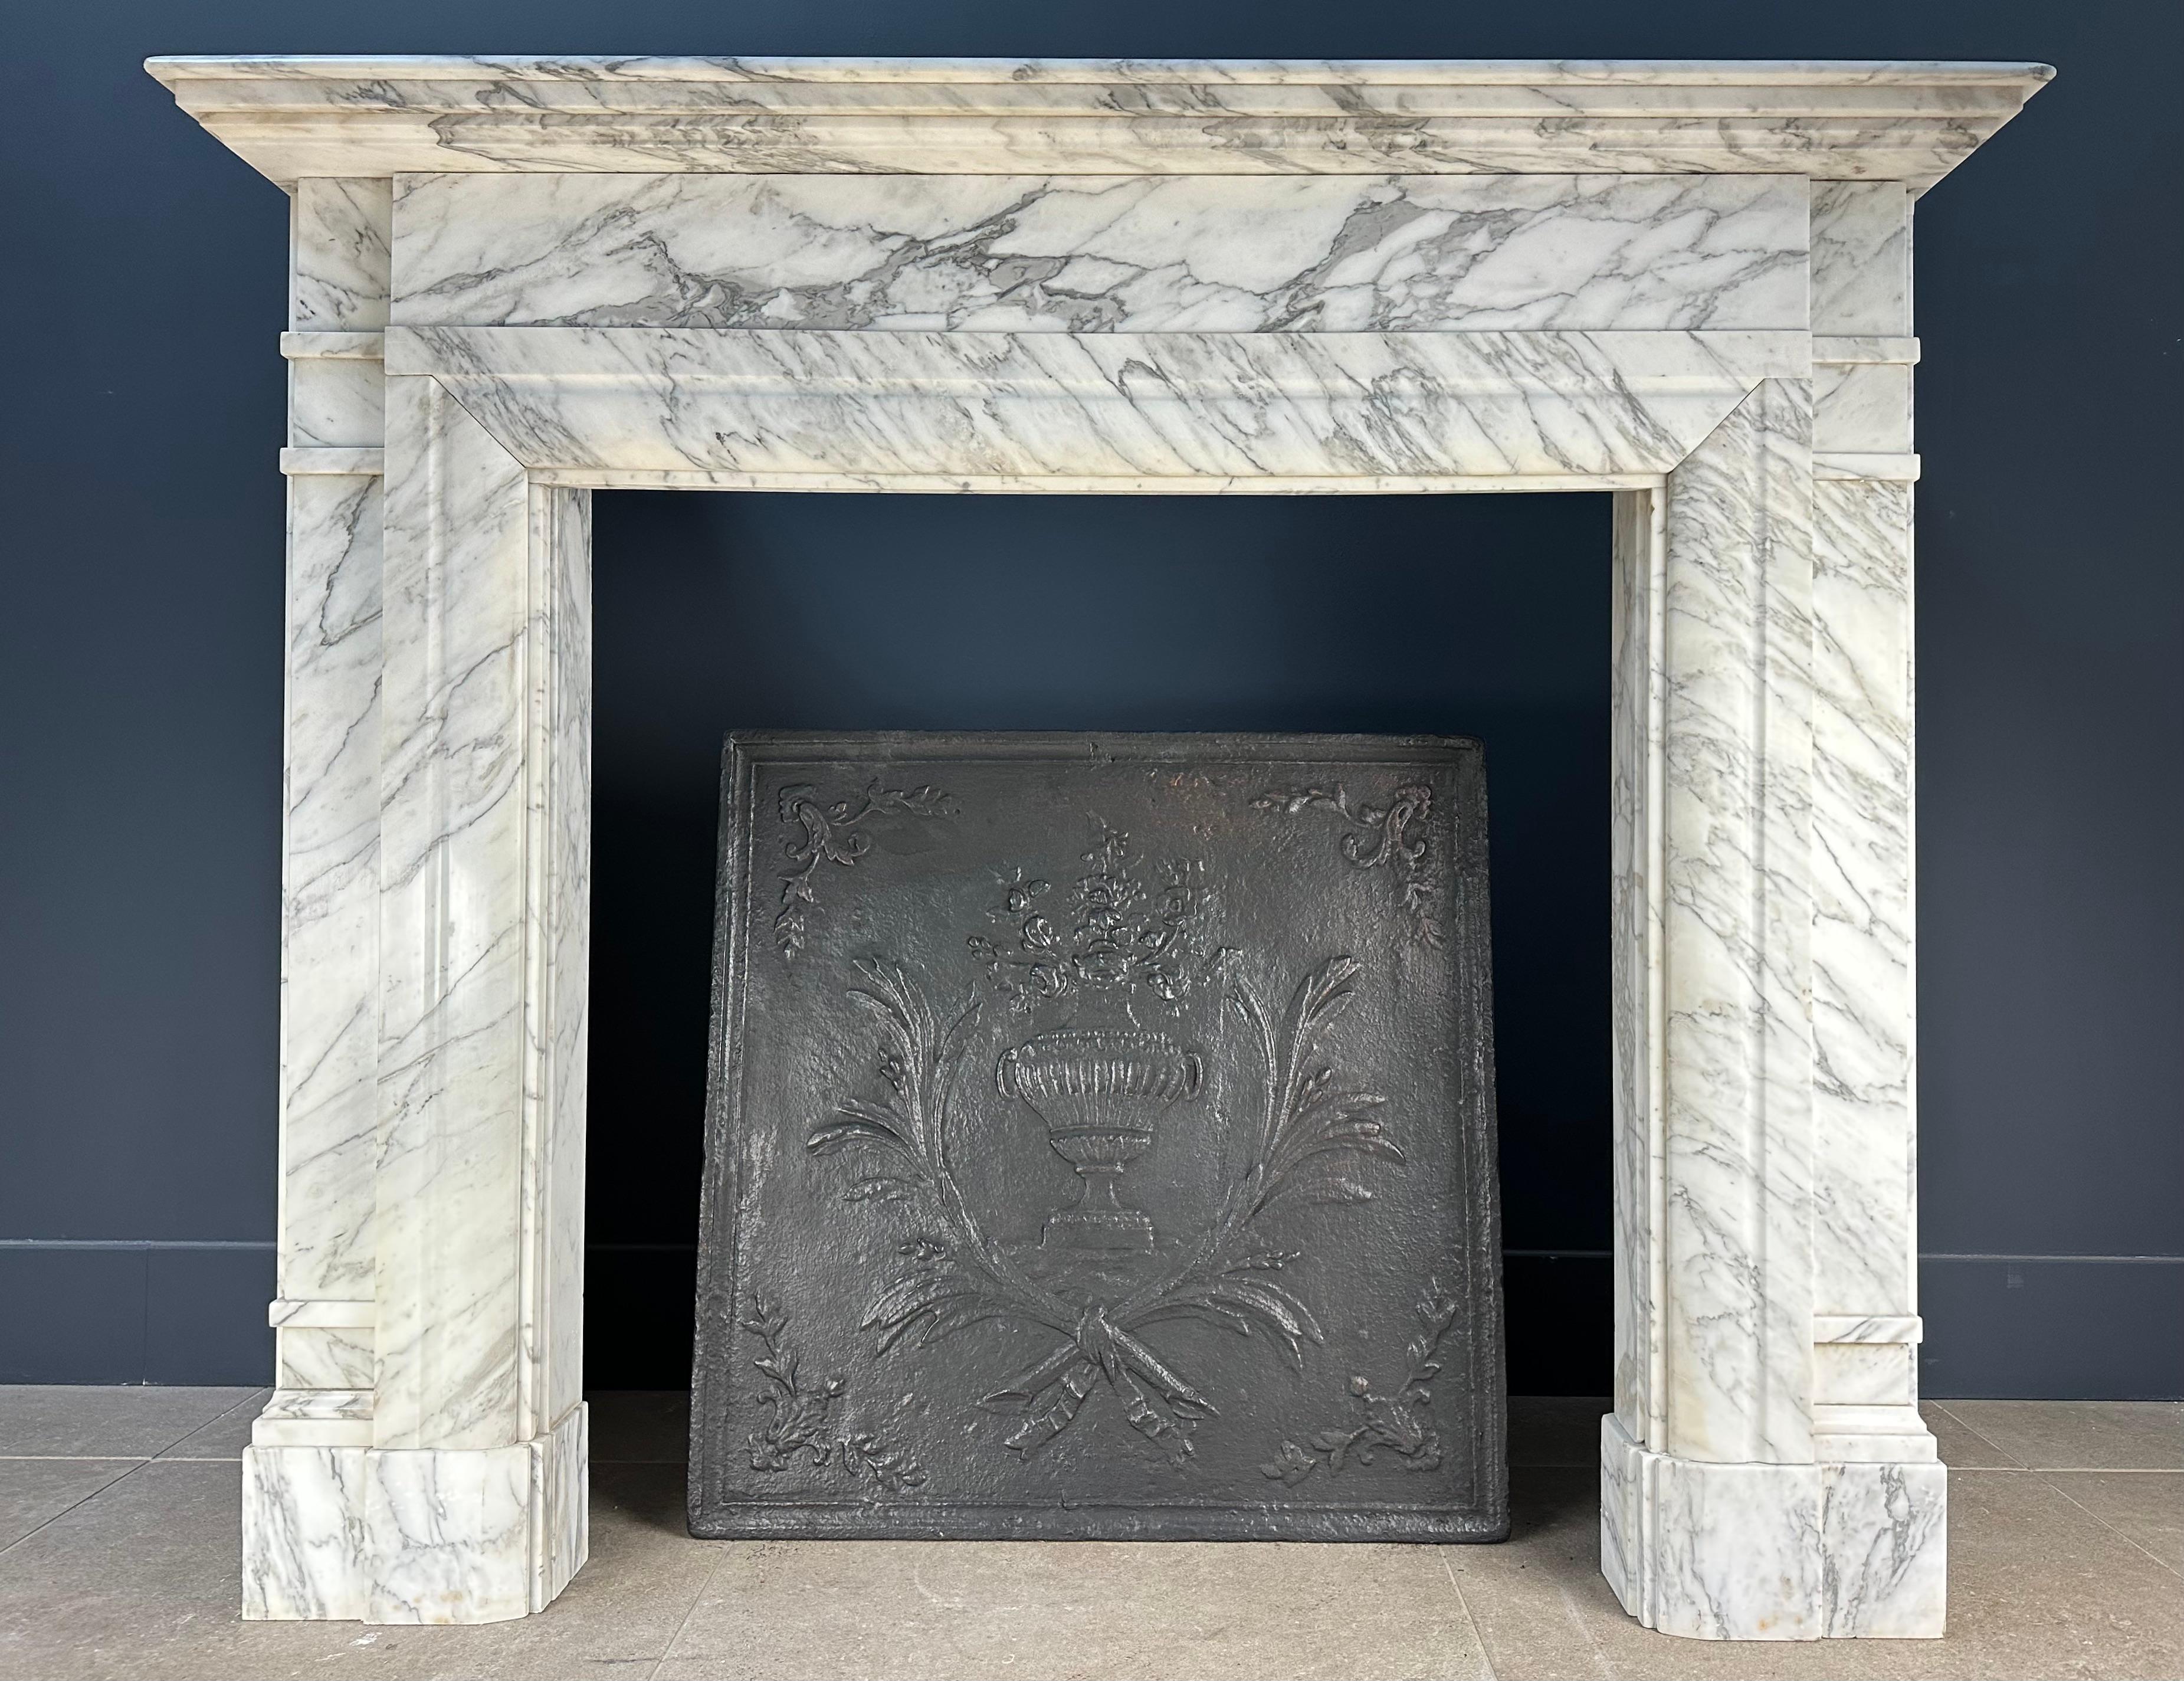 Beautiful l antique cast iron fireback. This fireback has a luxurious look. The fireback can be placed in a working fireplace against the fire wall or placed as a style item in an antique fireplace.